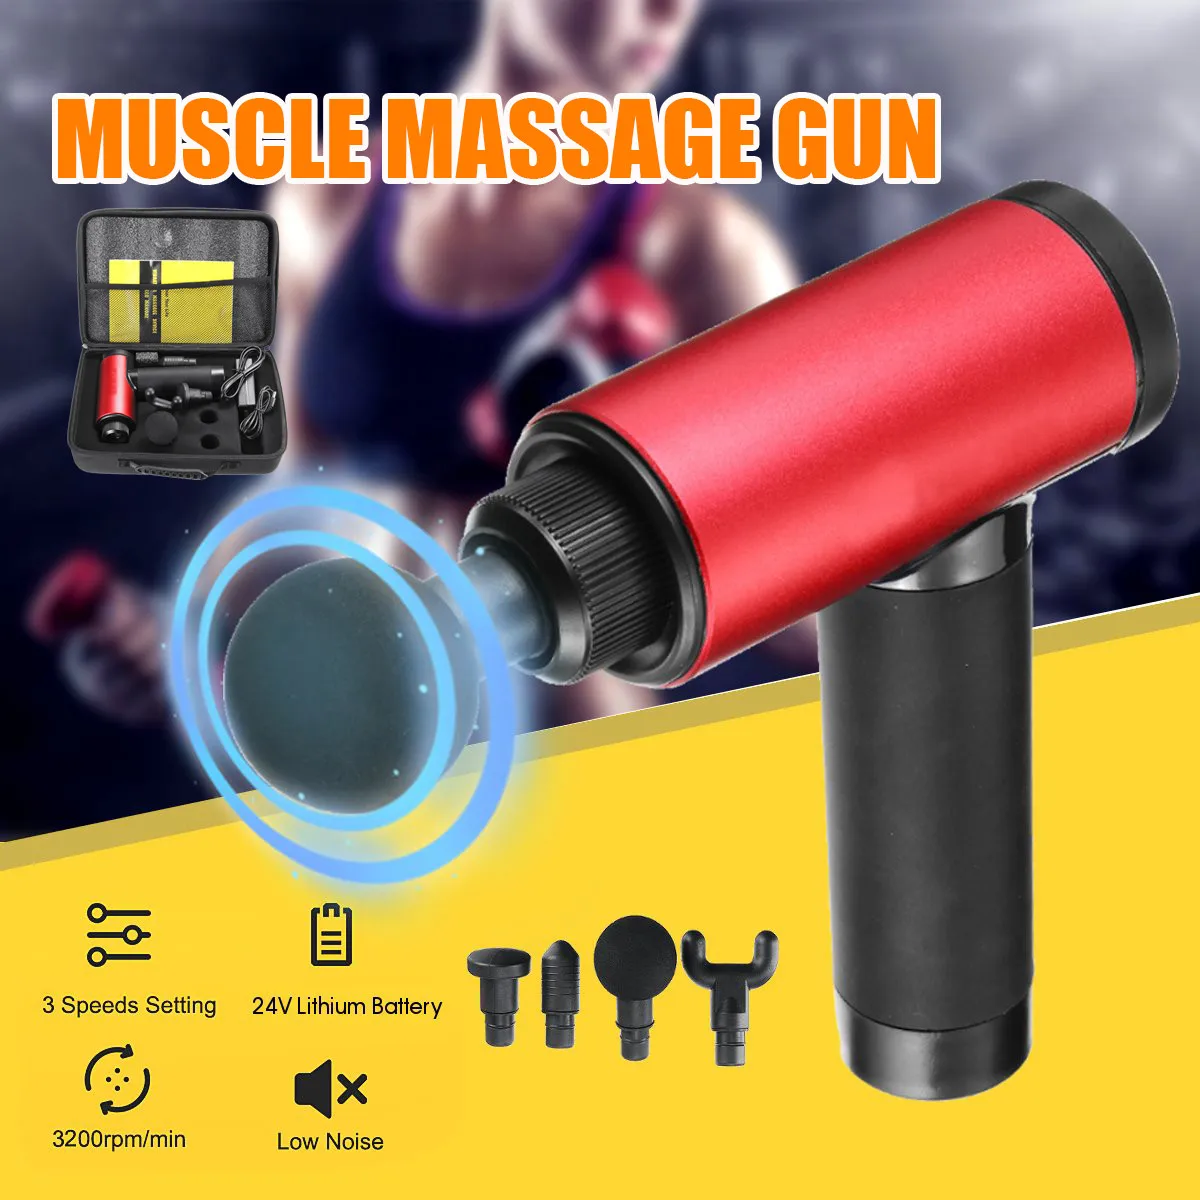 

Vibrating Massager Therapy G un Electric Vibration Muscle Massage Therapy Device